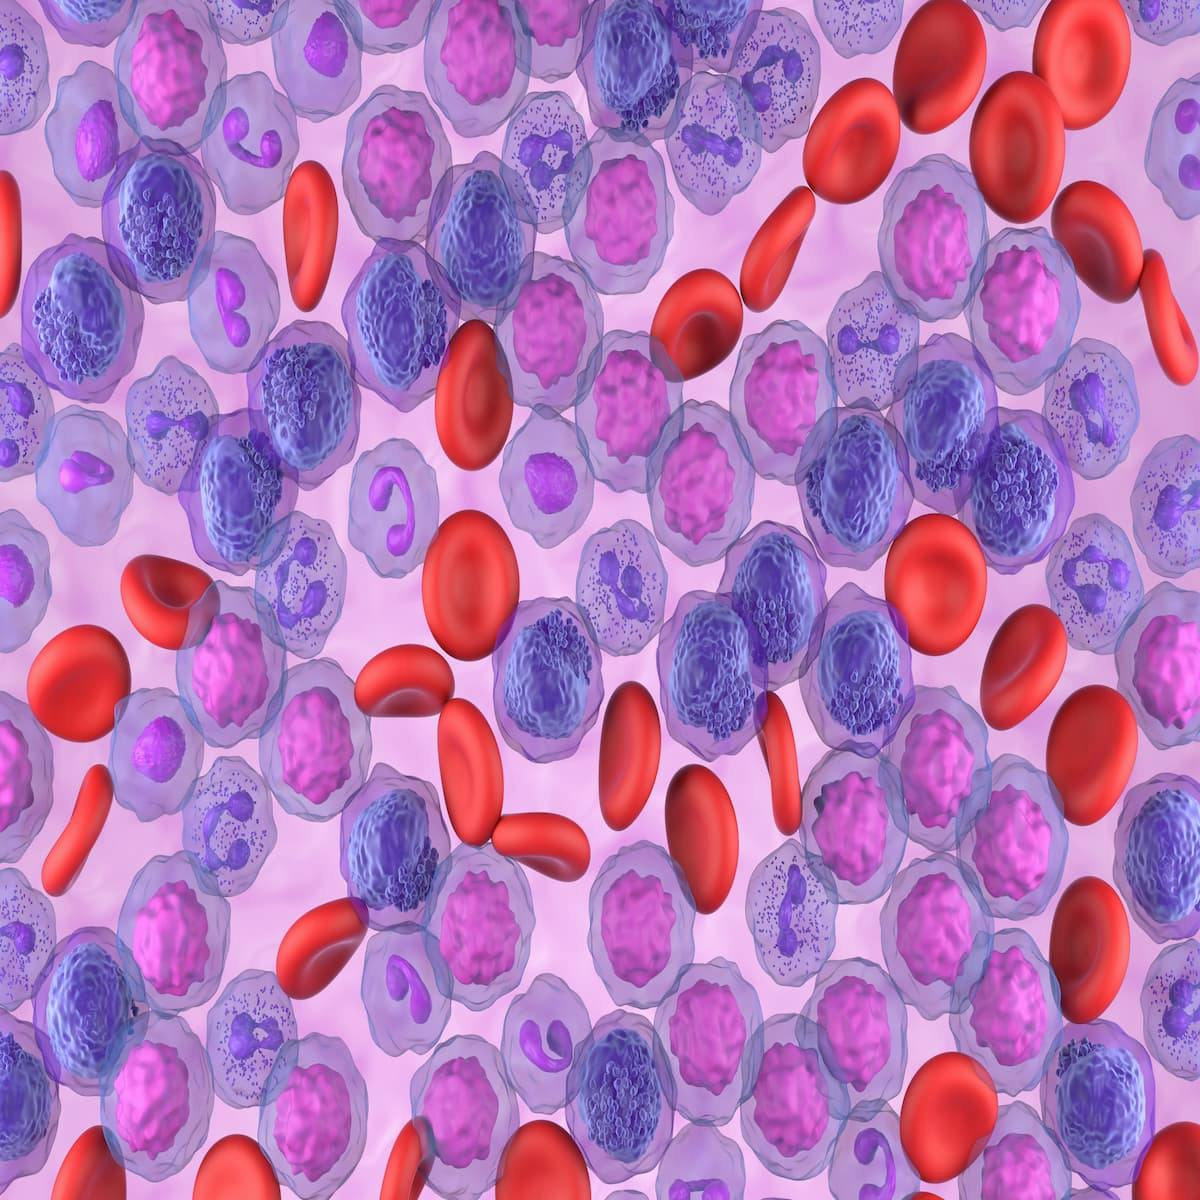 Allogeneic Cell Therapy Shows Early Efficacy in Acute Myeloid Leukemia